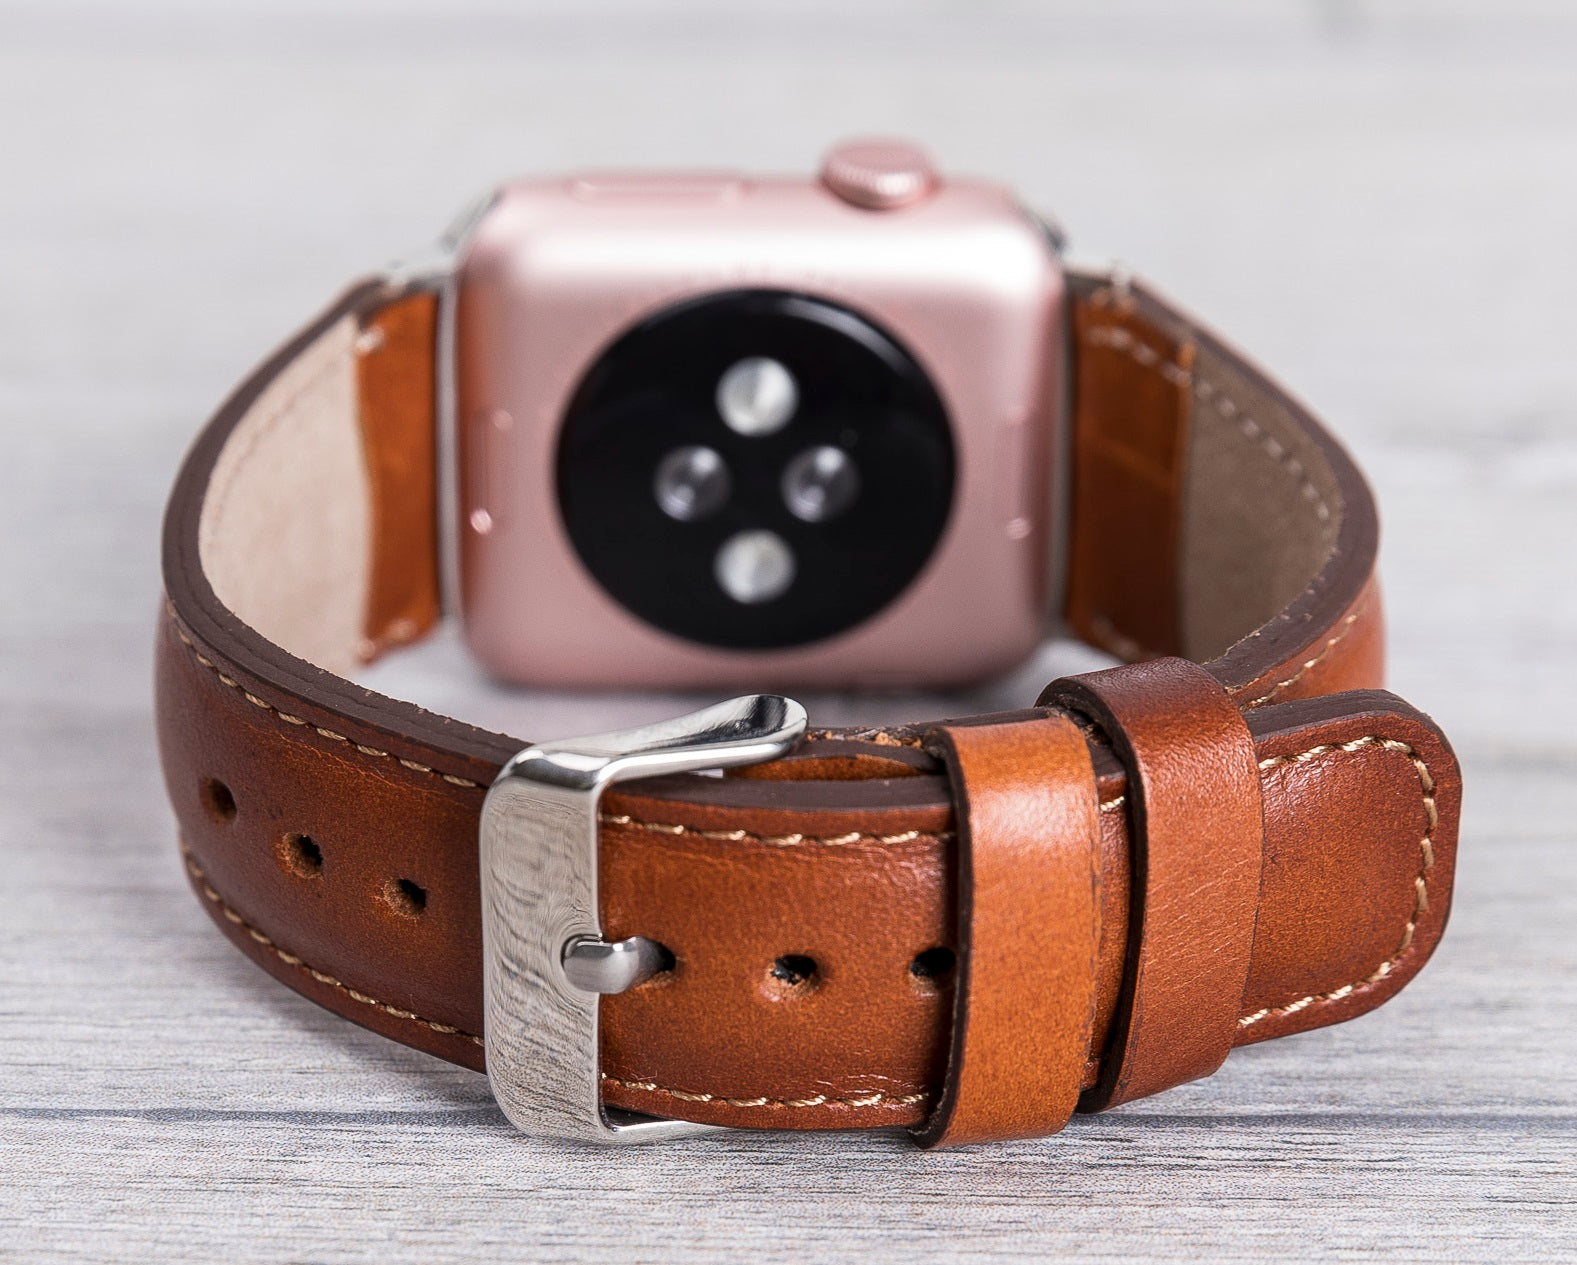 Full Grain Leather Tan Color Band for Apple Watch